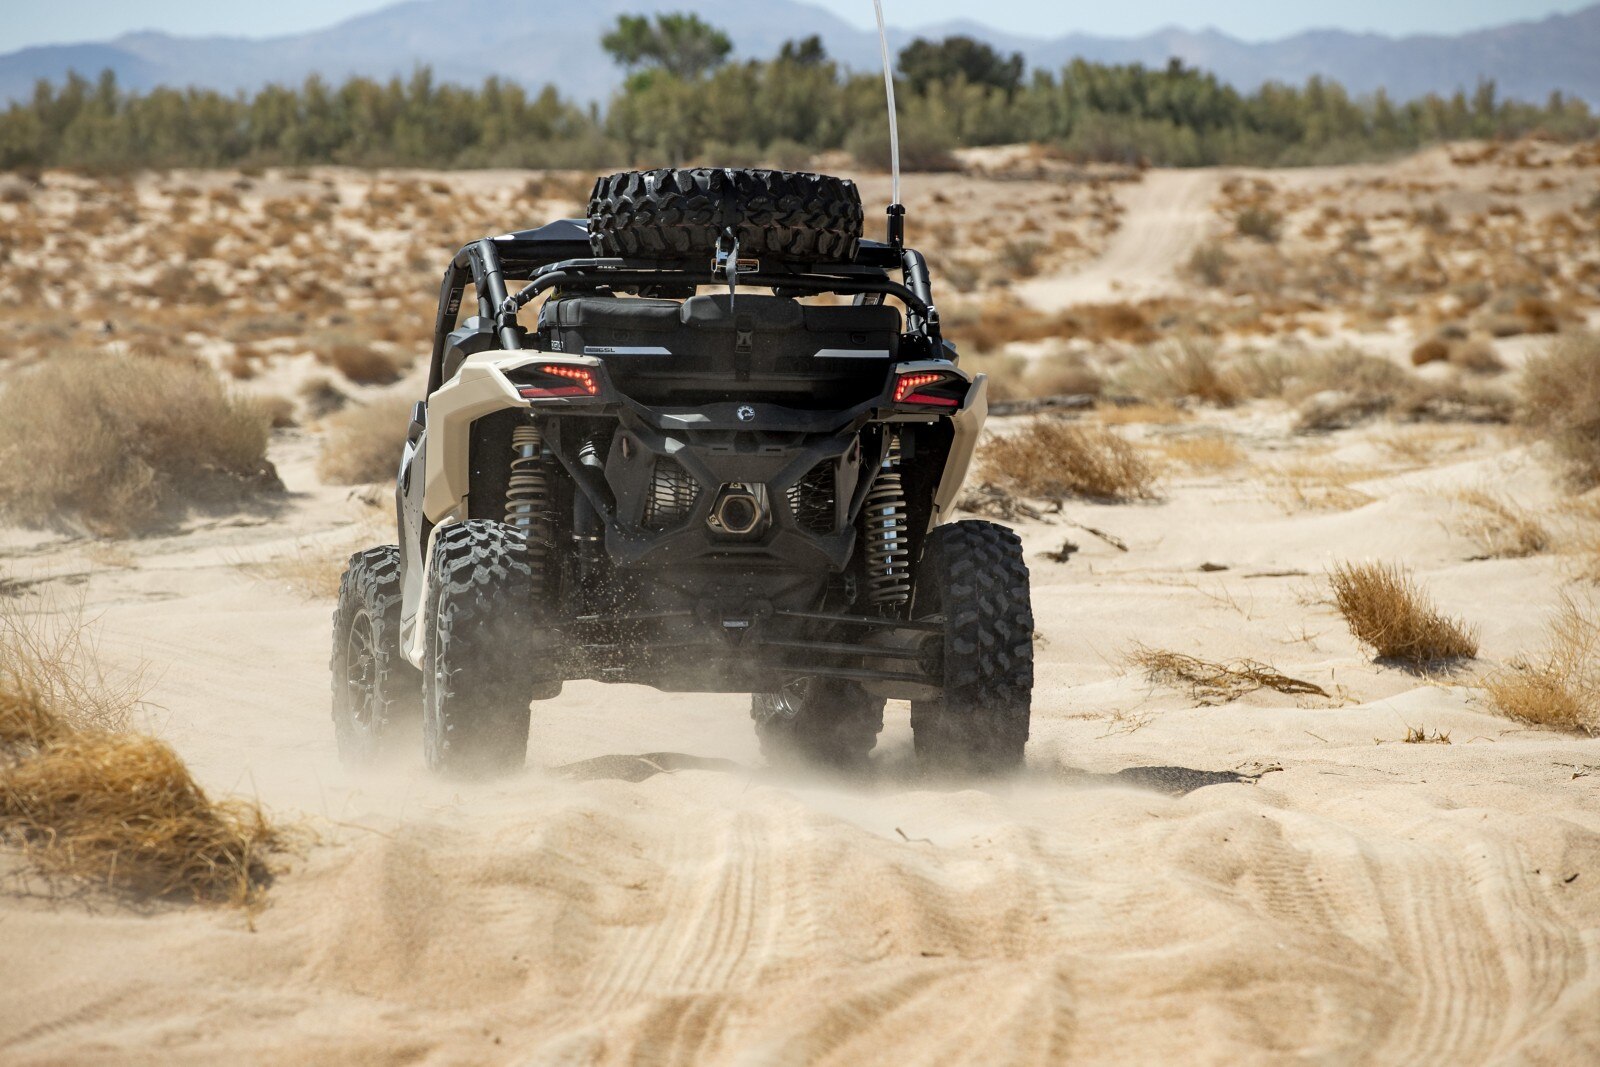 Maverick X3 equipped with LinQ accessories in the desert